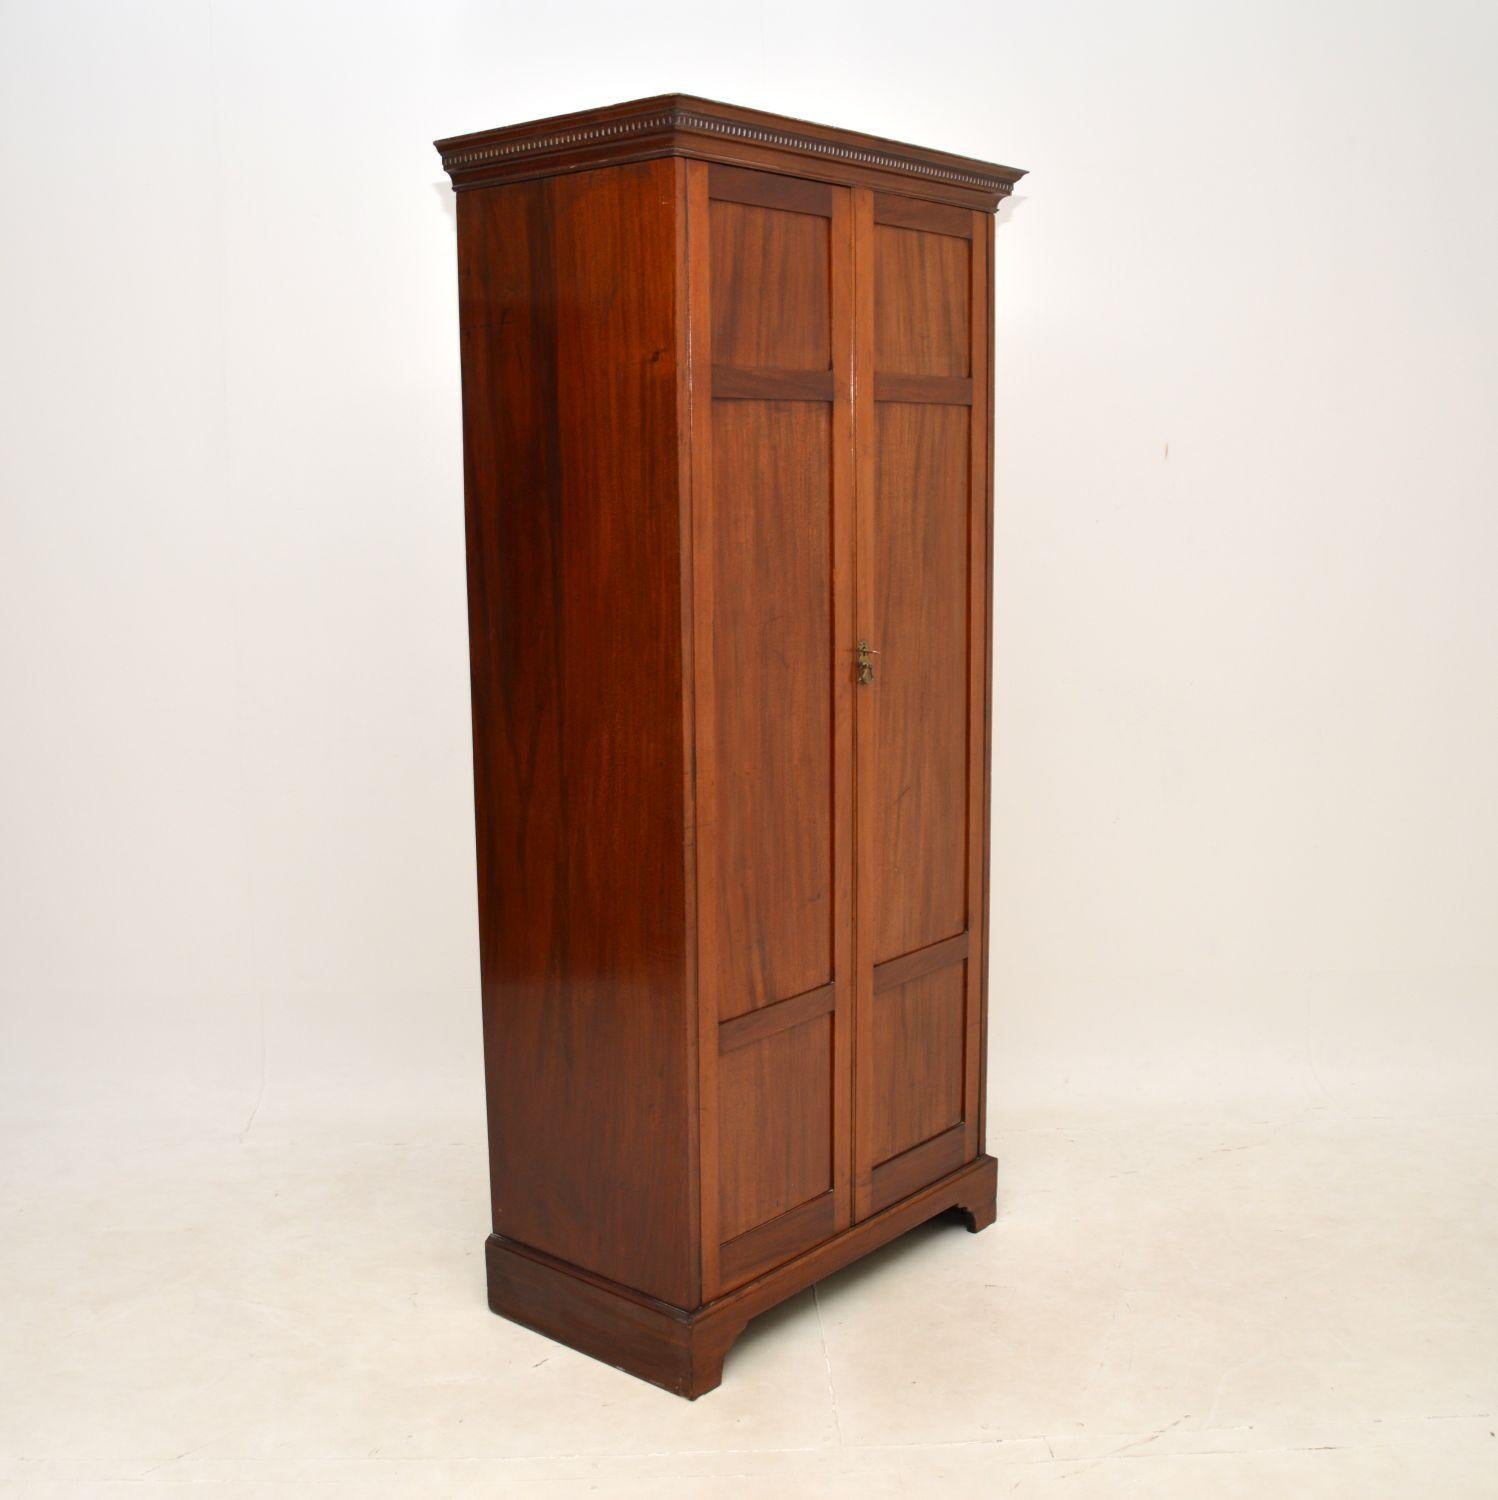 A wonderful antique wardrobe / hall cupboard. This was made in England, it dates from the 1900-1910 period.

The quality is outstanding, this is beautifully made with paneled doors, bracket feet and dental molding under the cornice. It is a very